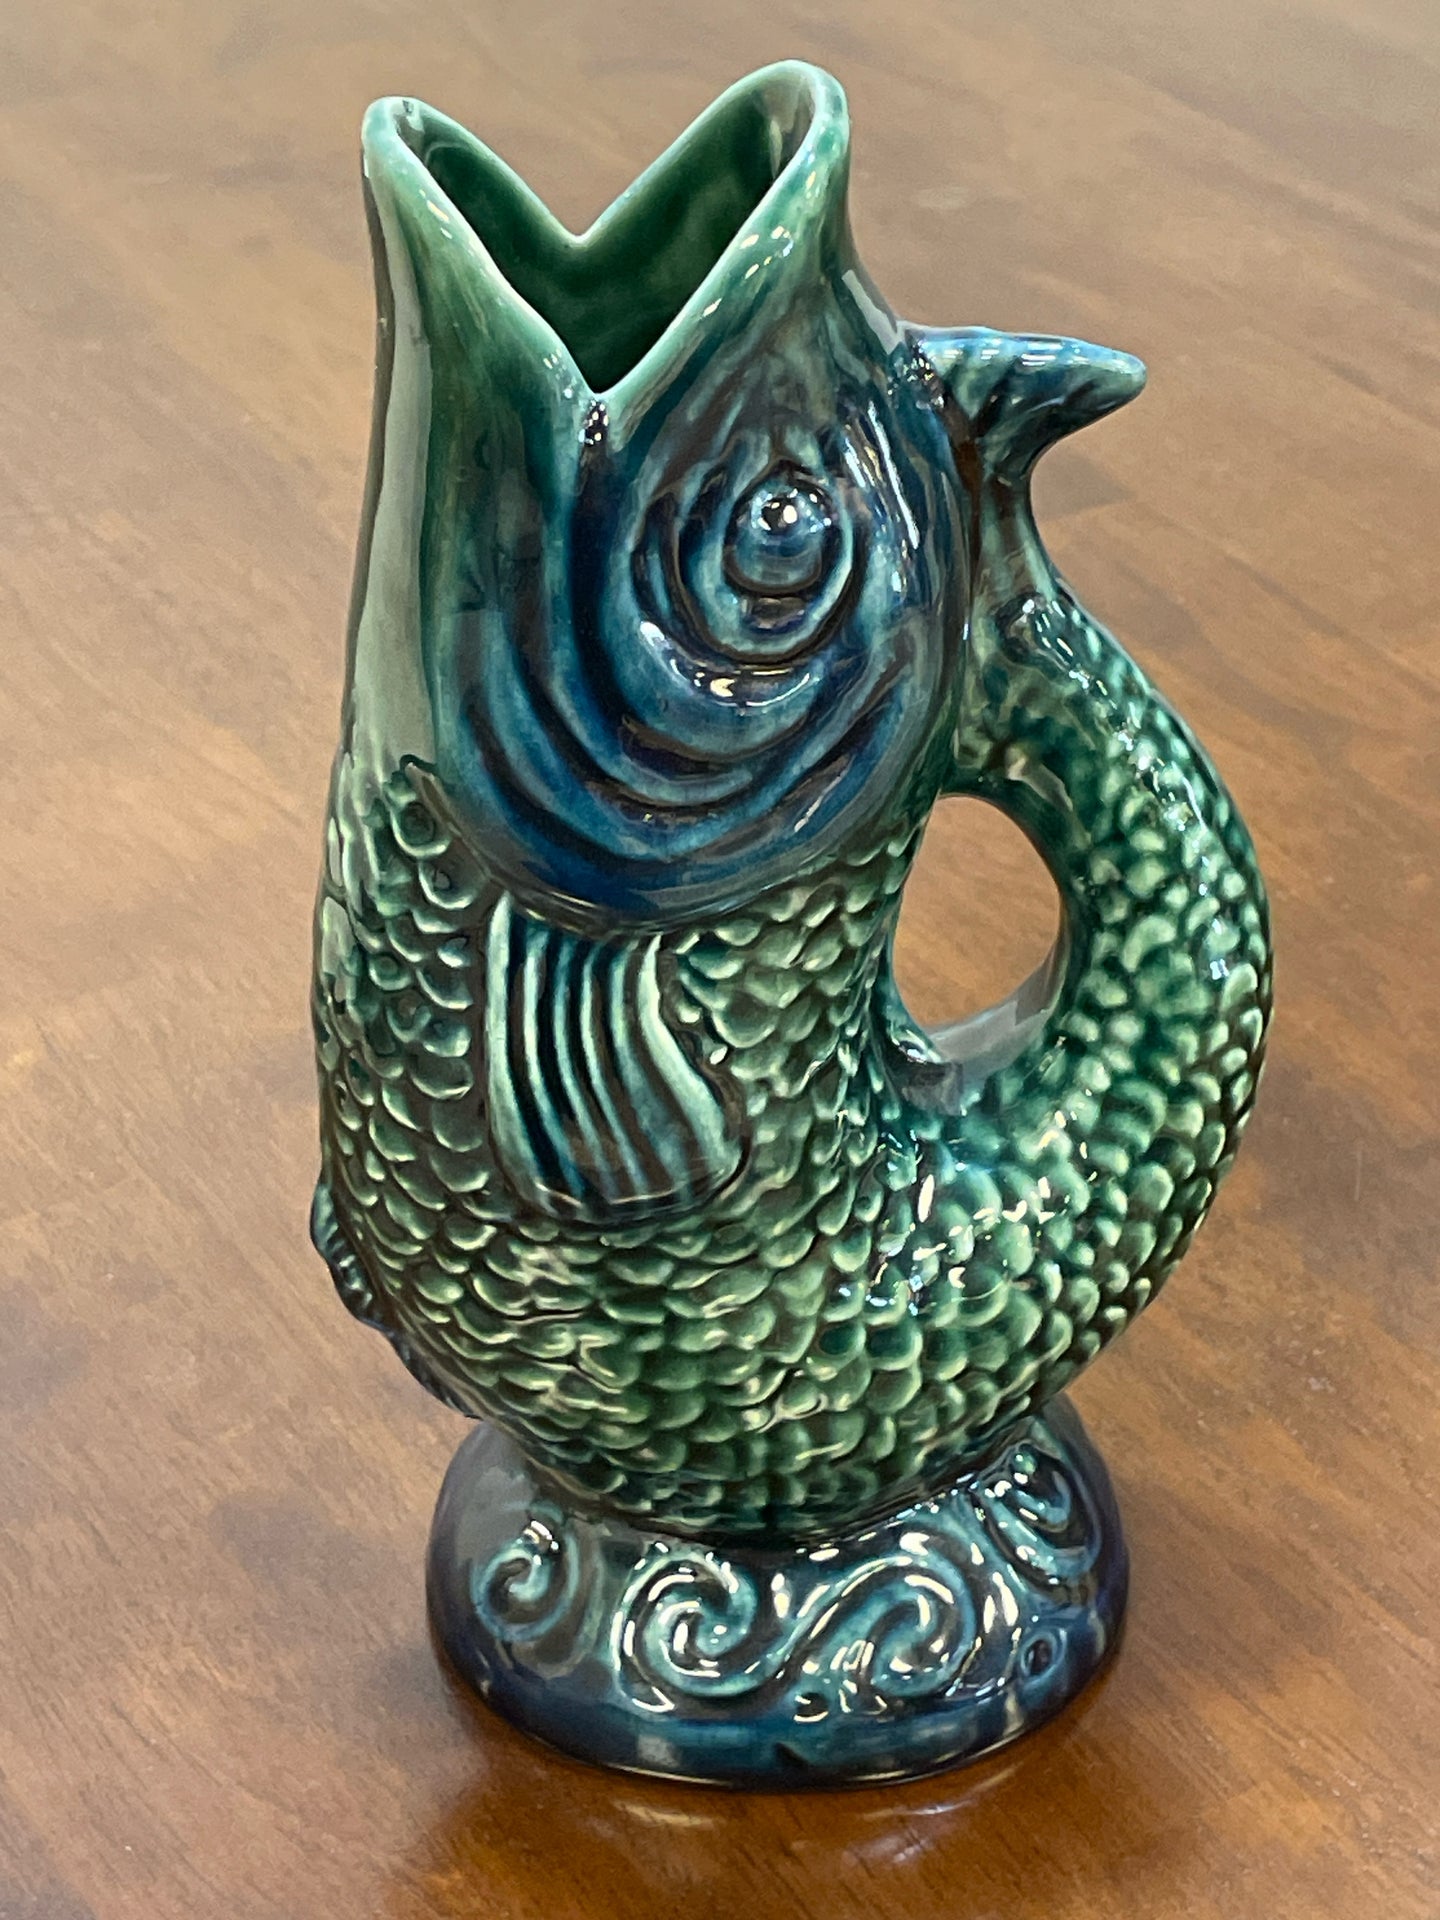 Blue & Green Fish Vase from Portugal